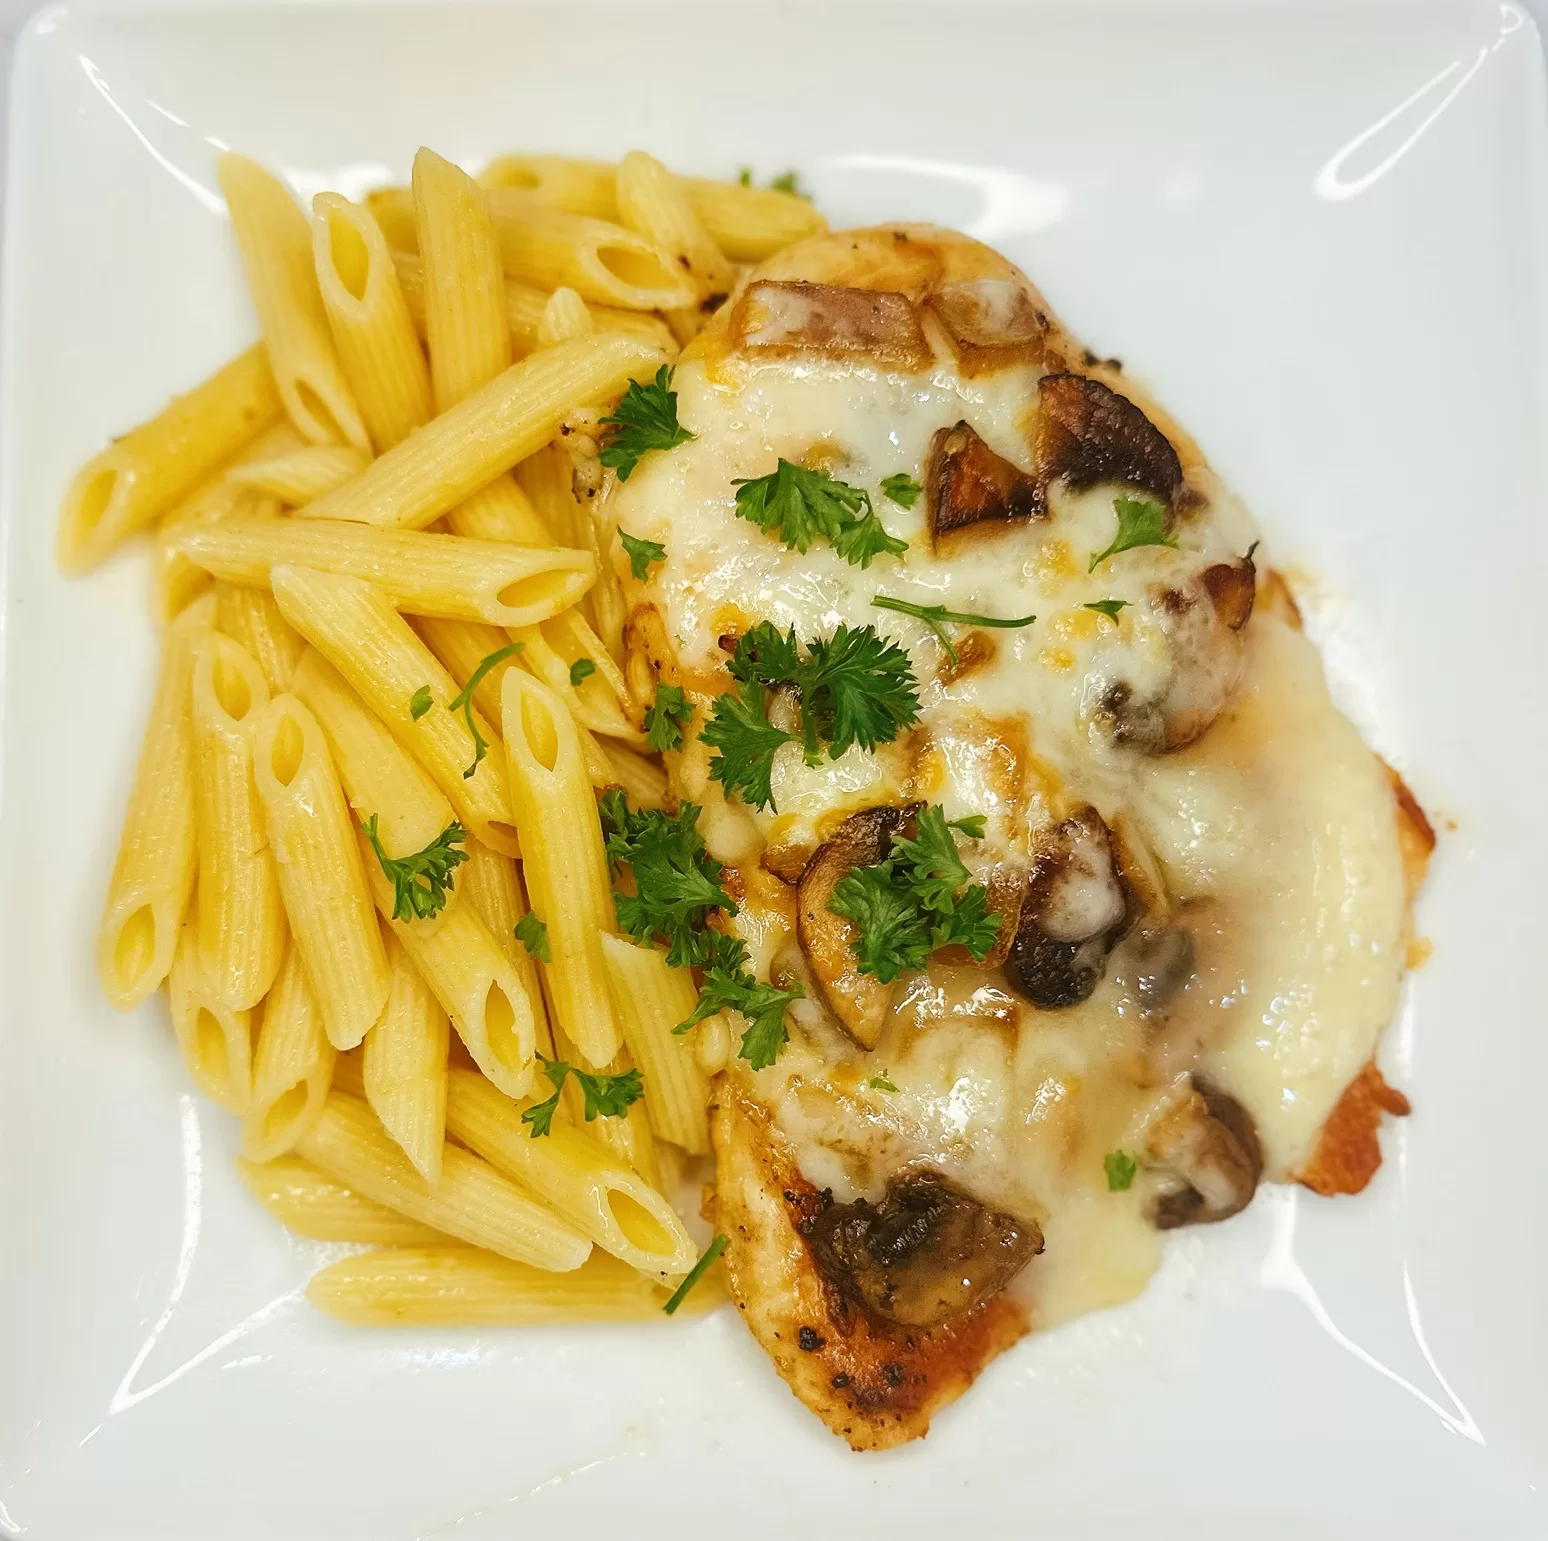 smothered chicken breast topped with melted cheese and onions served with pasta